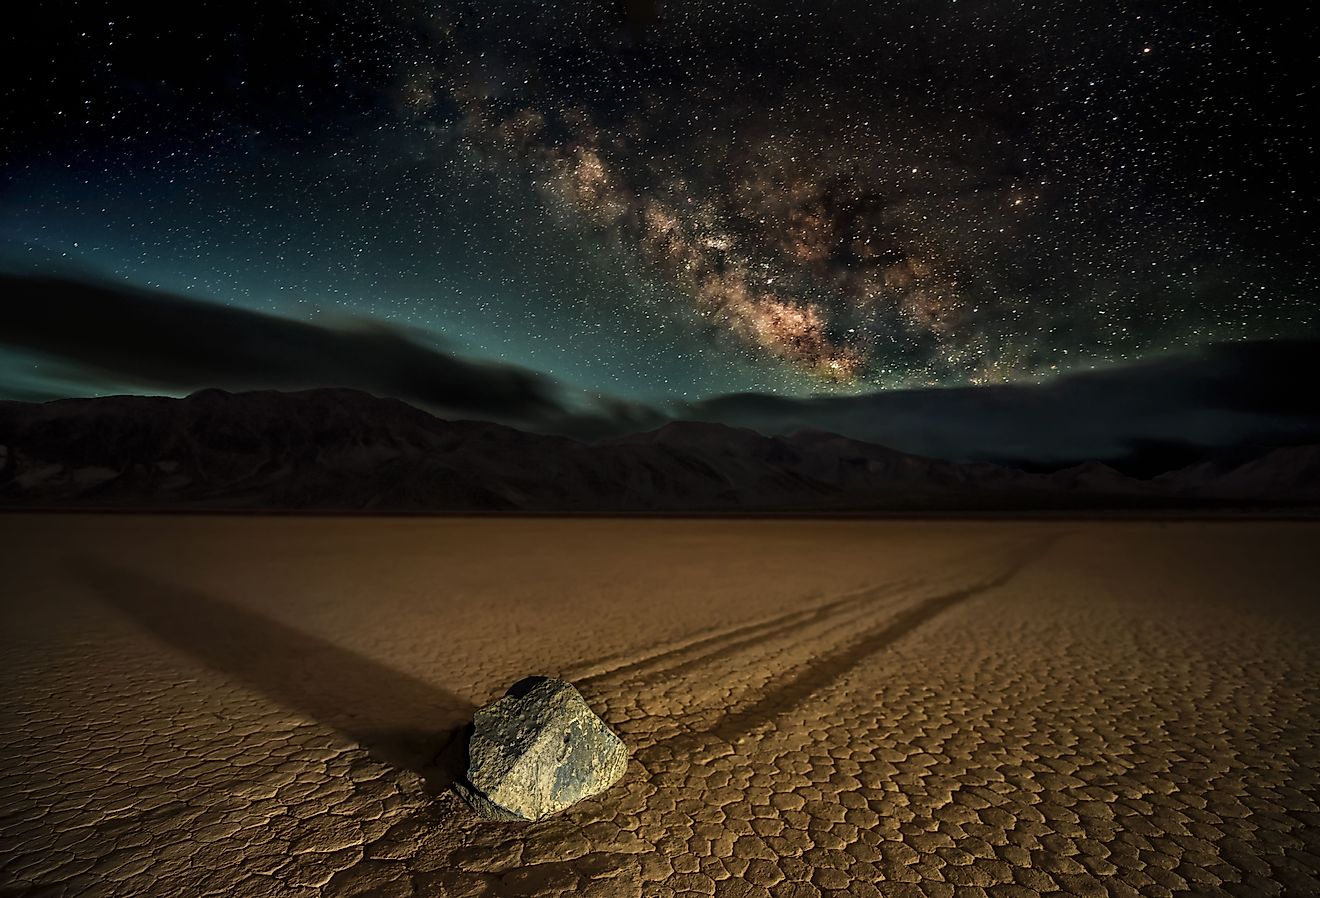 Racetrack Playa. A 'Sailing Stone' photographed at night under the Milky Way at California's Death Valley National Park at the Racetrack Playa. An alien, eerie, and mysterious spectacle.